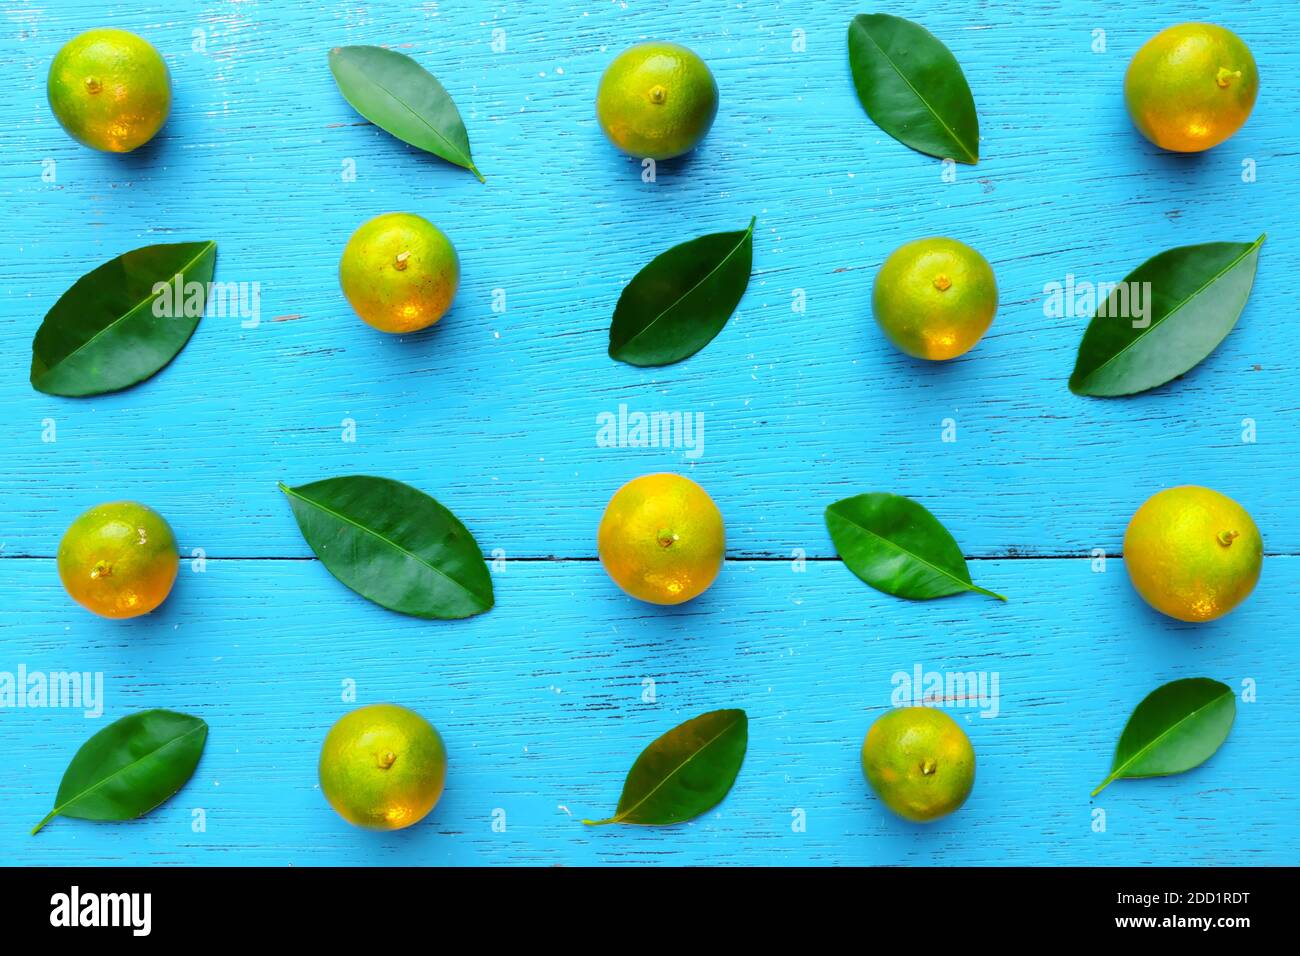 Yellow green calamansi, calamondin or philippine lime tropical fruits and leaves pattern in bright blue wood background. Asian summer citrus fruit. Stock Photo